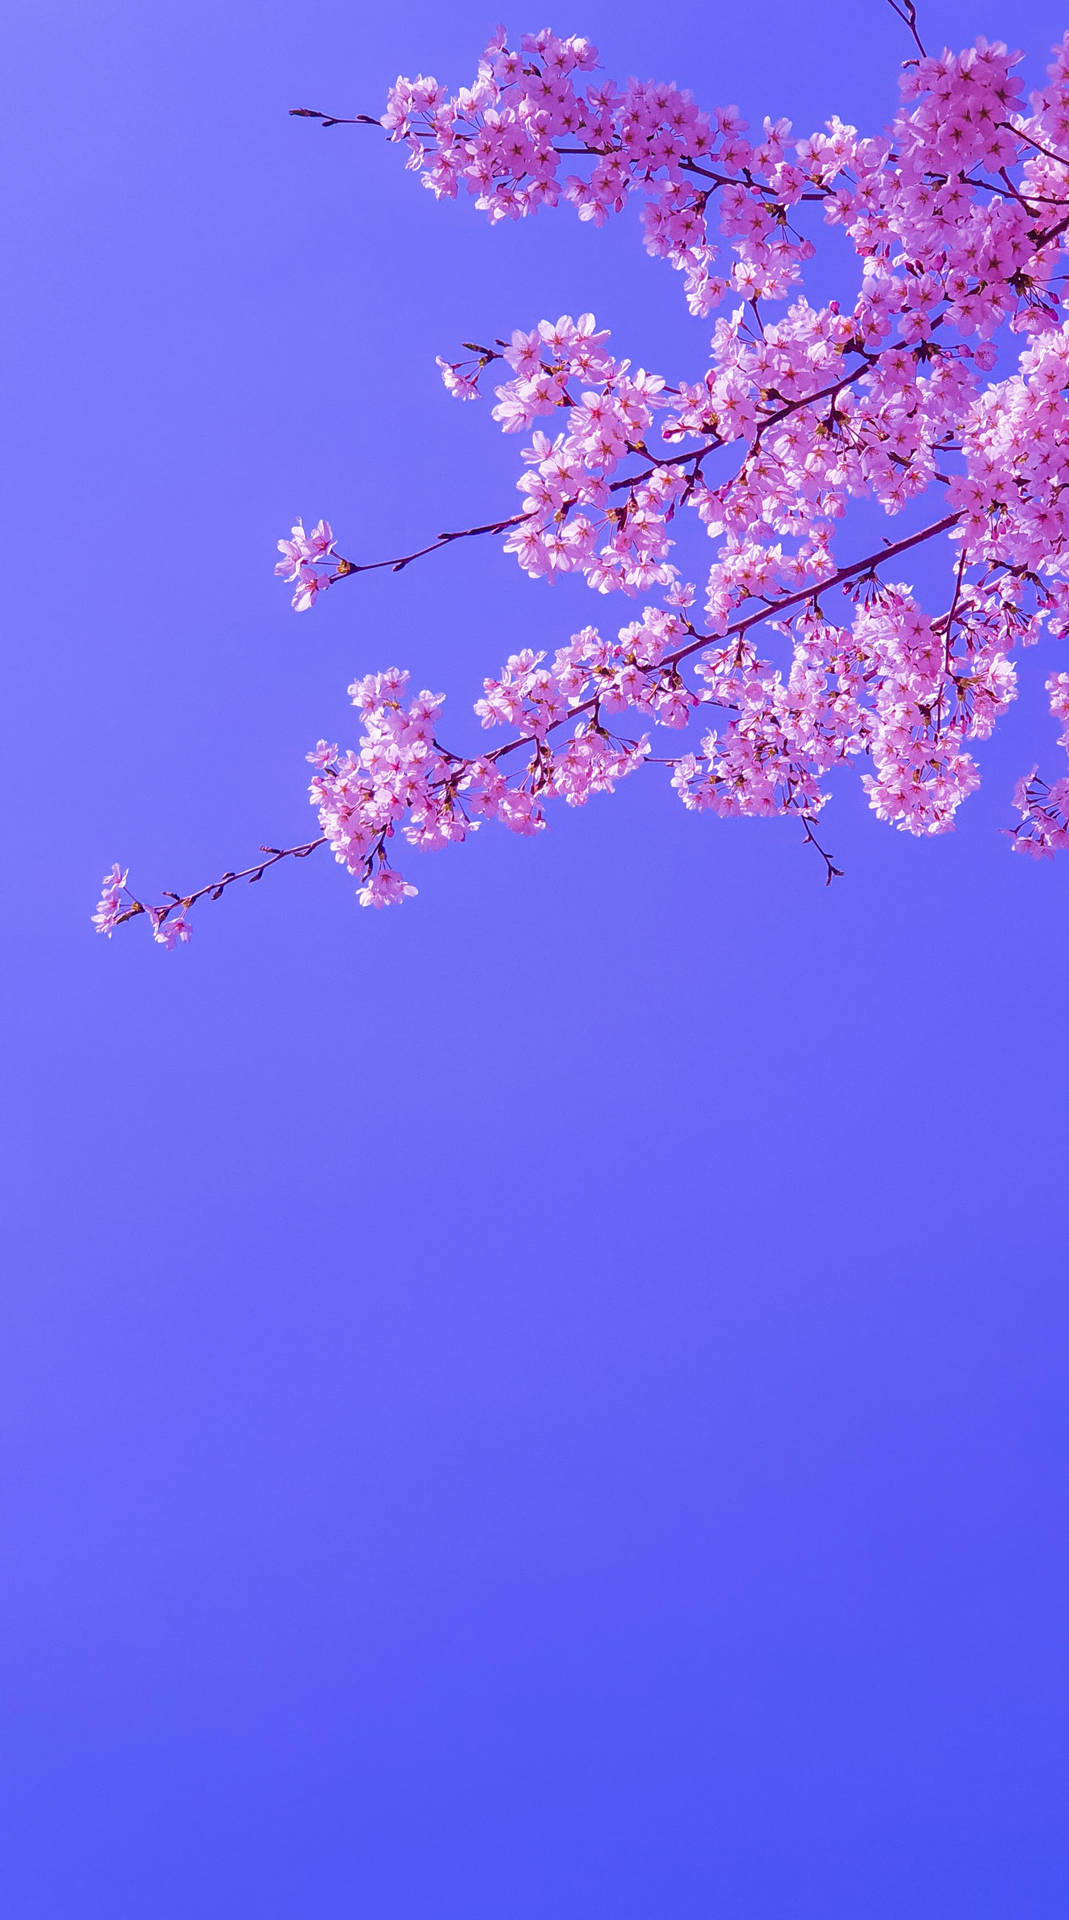 “A magical moment in the Japanese spring” Wallpaper